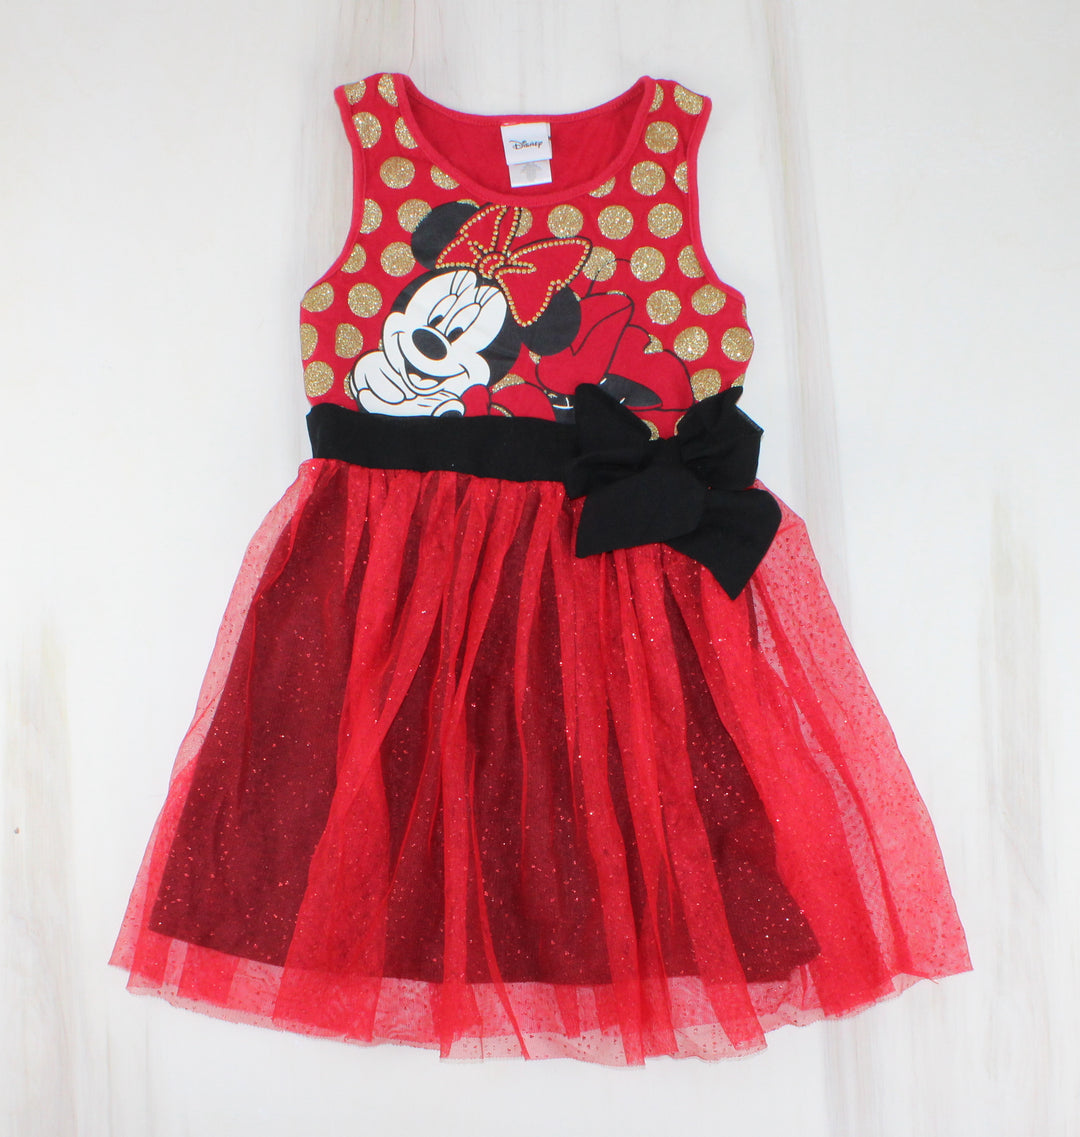 DISNEY MINNIE MOUSE RED TIE BACK DRESS WITH TULLE 5Y EUC